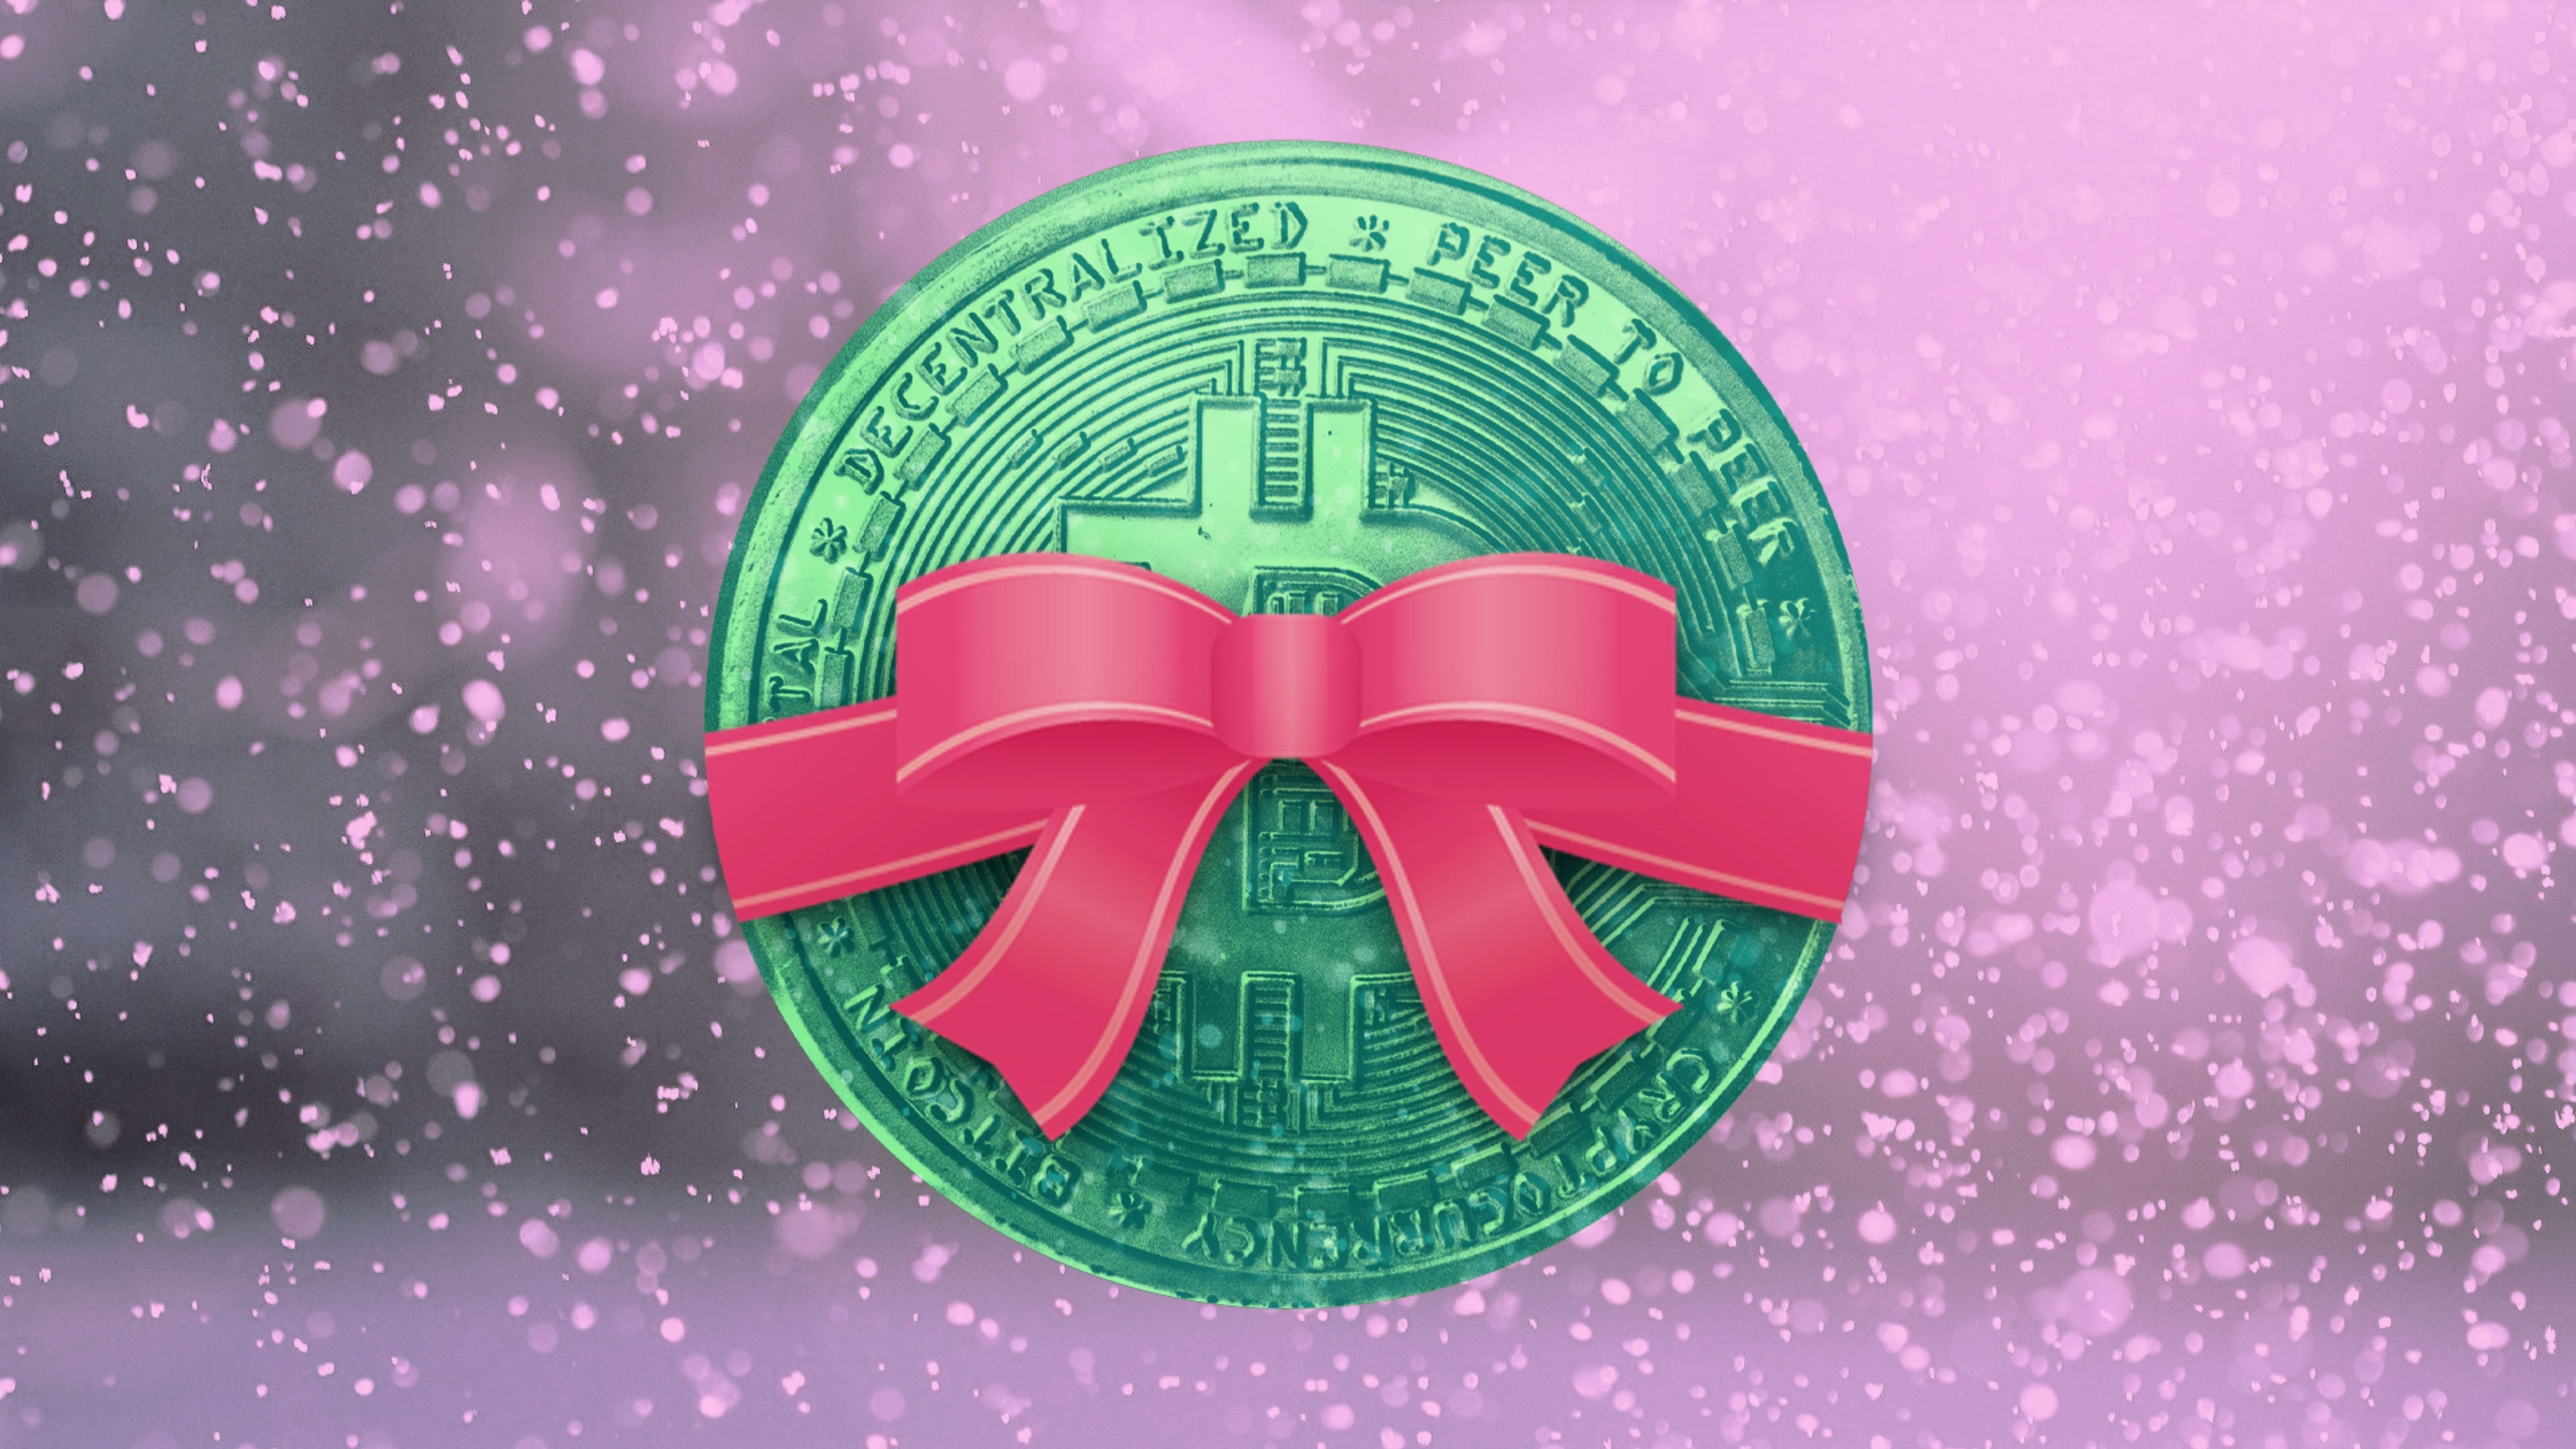 Want to put Bitcoin in their stocking this year? Here’s how to gift crypto